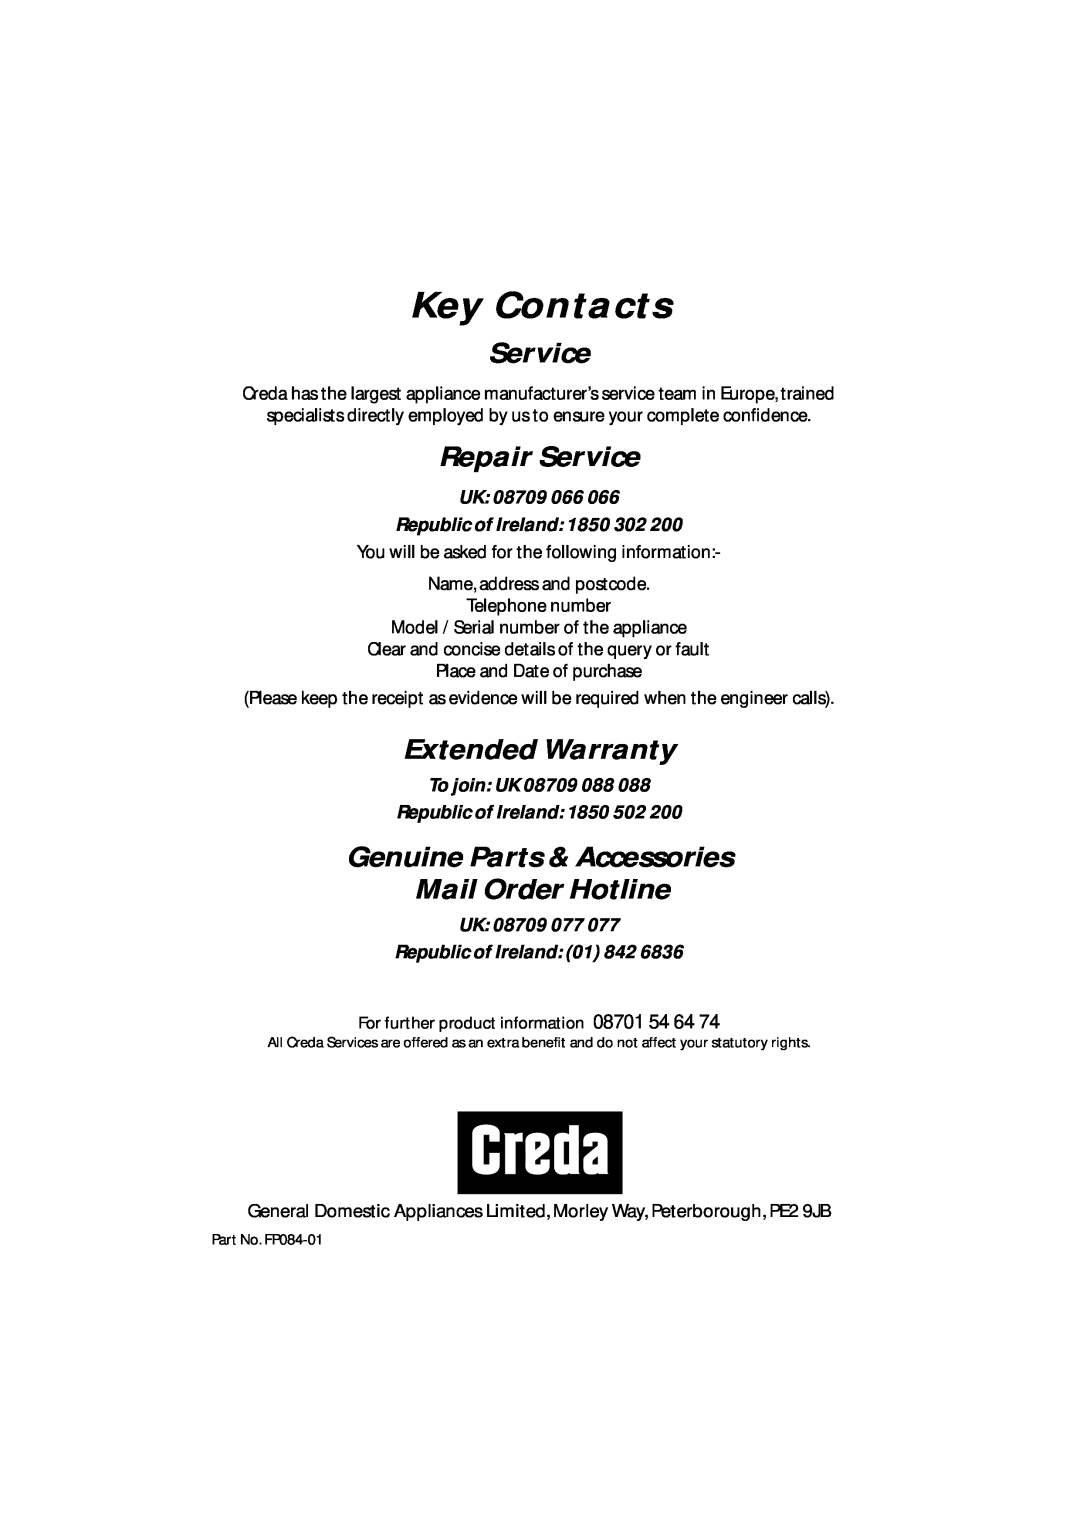 Creda CRC95 manual Key Contacts, Repair Service, Extended Warranty, Genuine Parts & Accessories Mail Order Hotline 